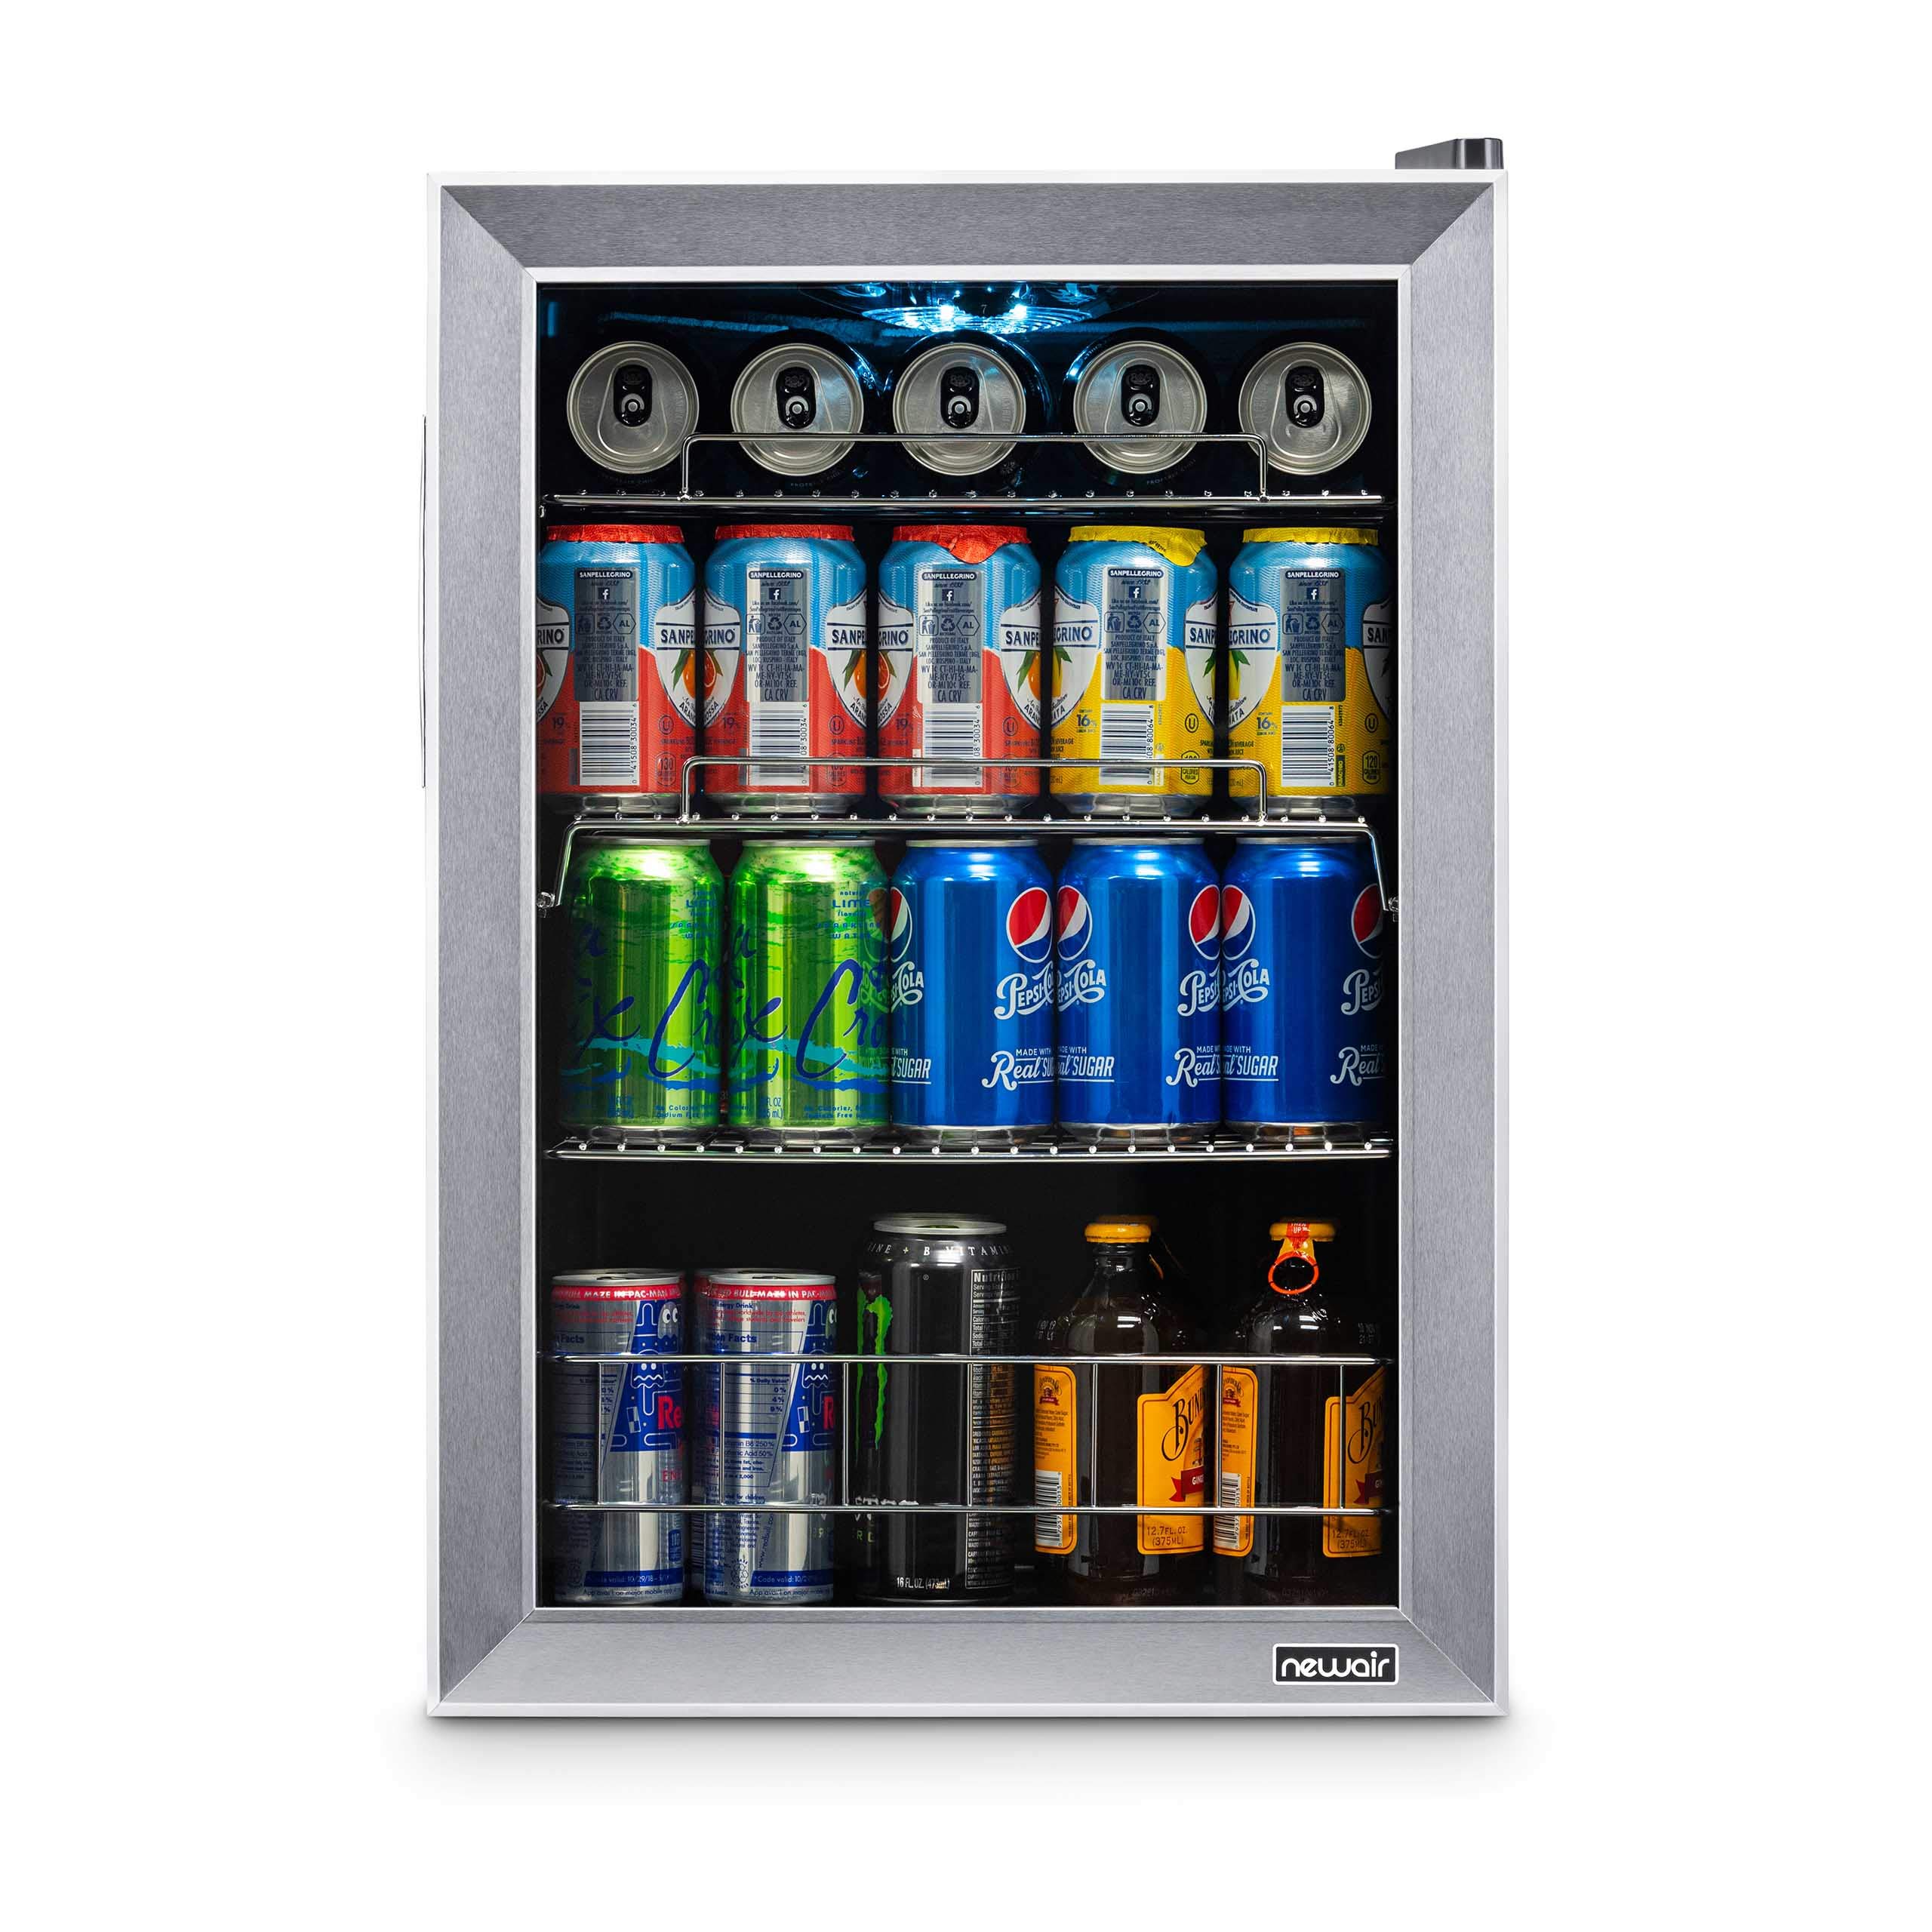 NewAir AB-850 Beverage Refrigerator Cooler with 90 Can Capacity - Mini Bar Beer Fridge with Right Hinge Glass Door - Cools to 37F - Stainless Steel